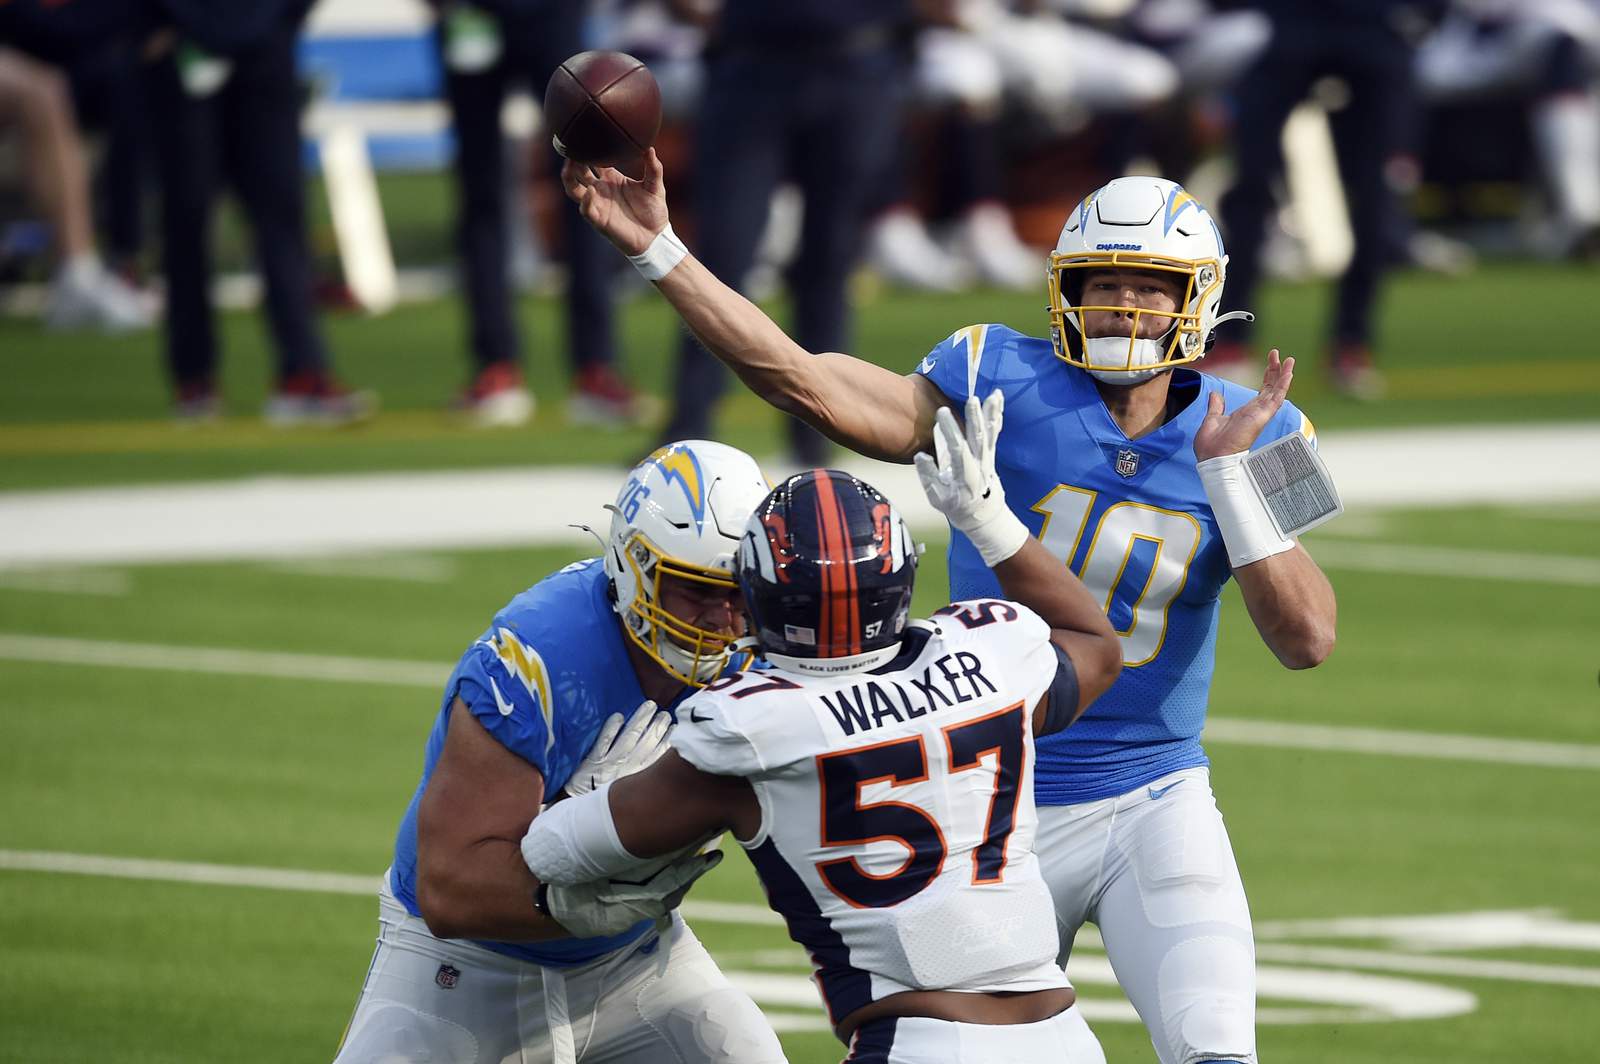 Chargers win third straight as Herbert sets rookie TD mark